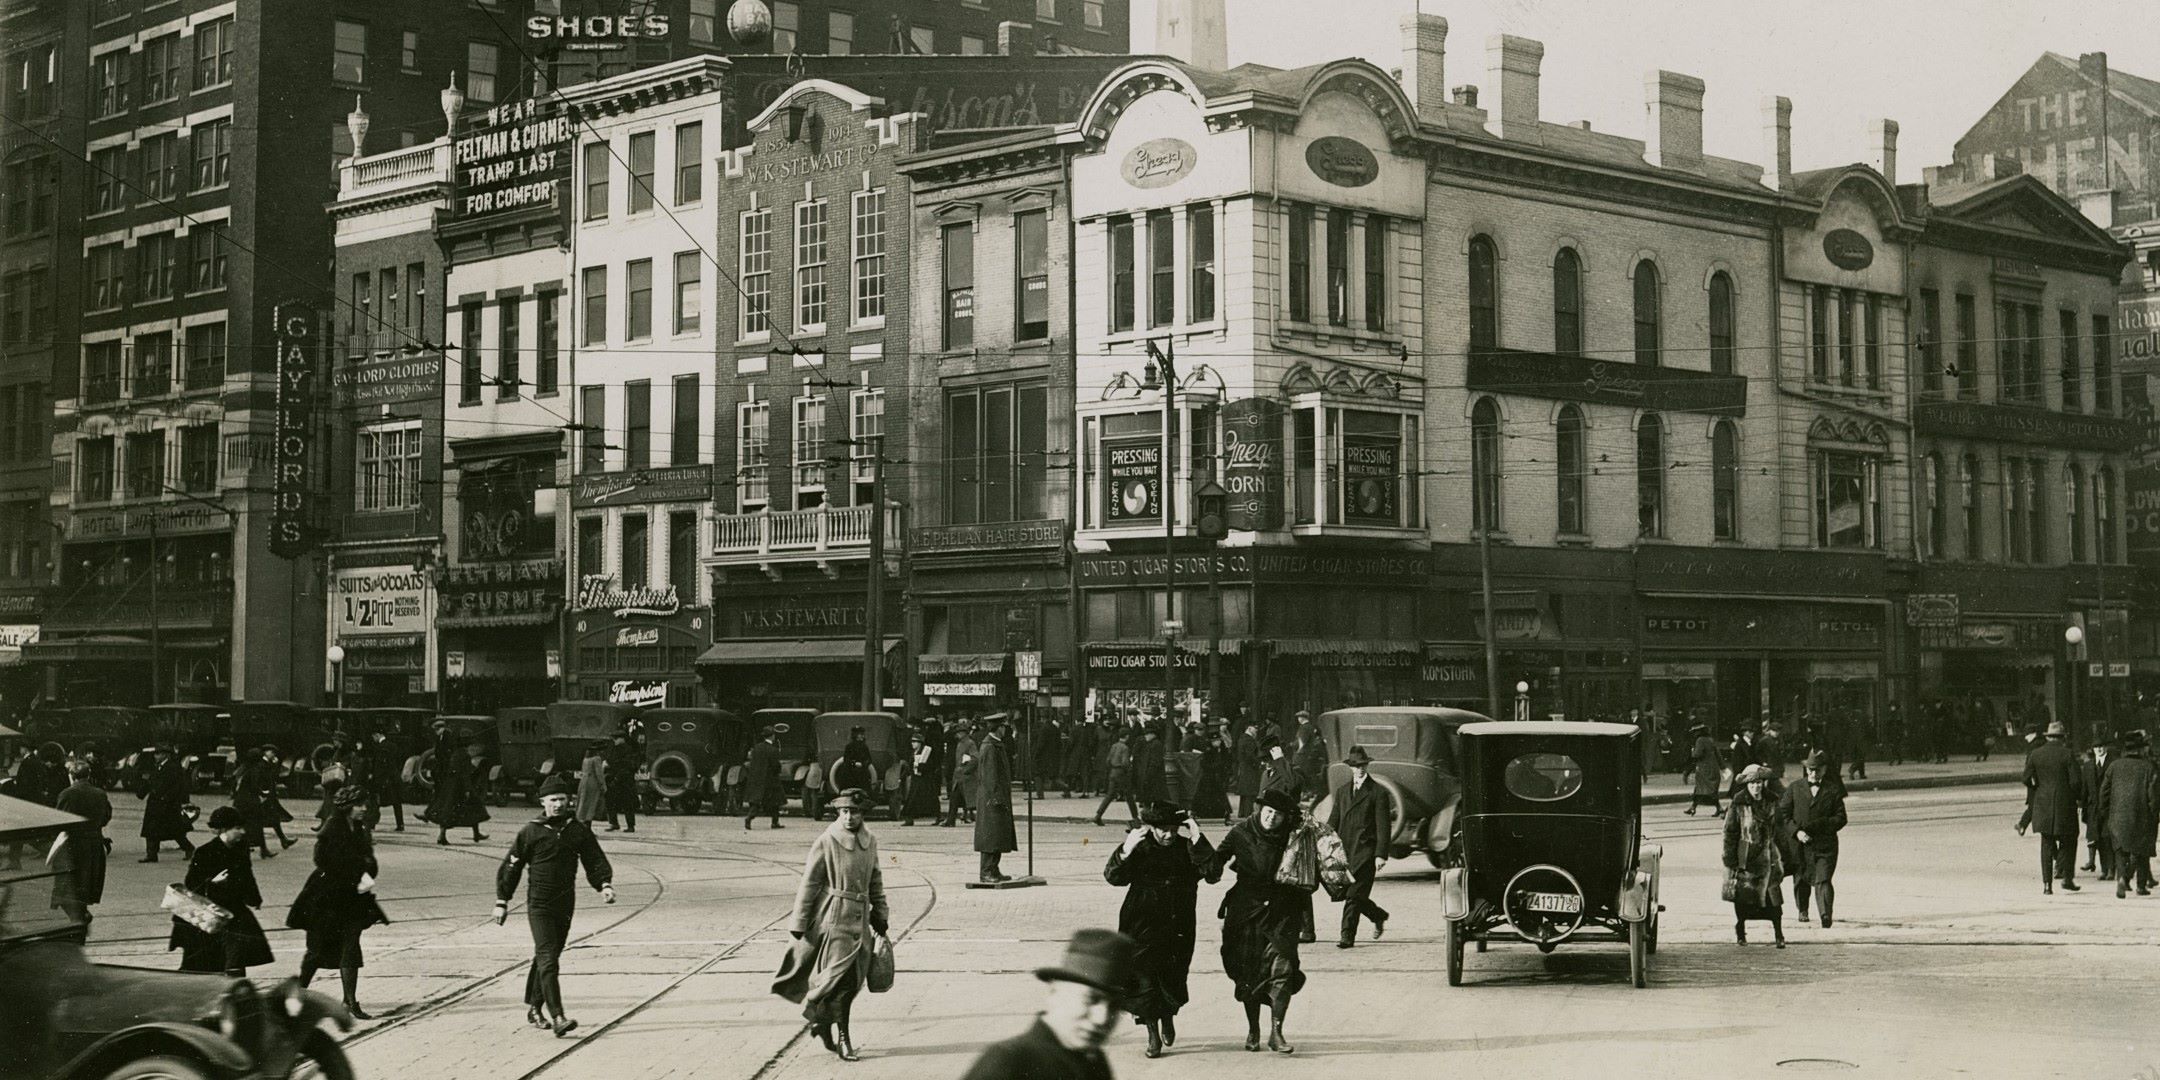 Pennsylvania and Washington streets in downtown Indianapolis, 1920. Bass Photo Collection, Indiana Historical Society